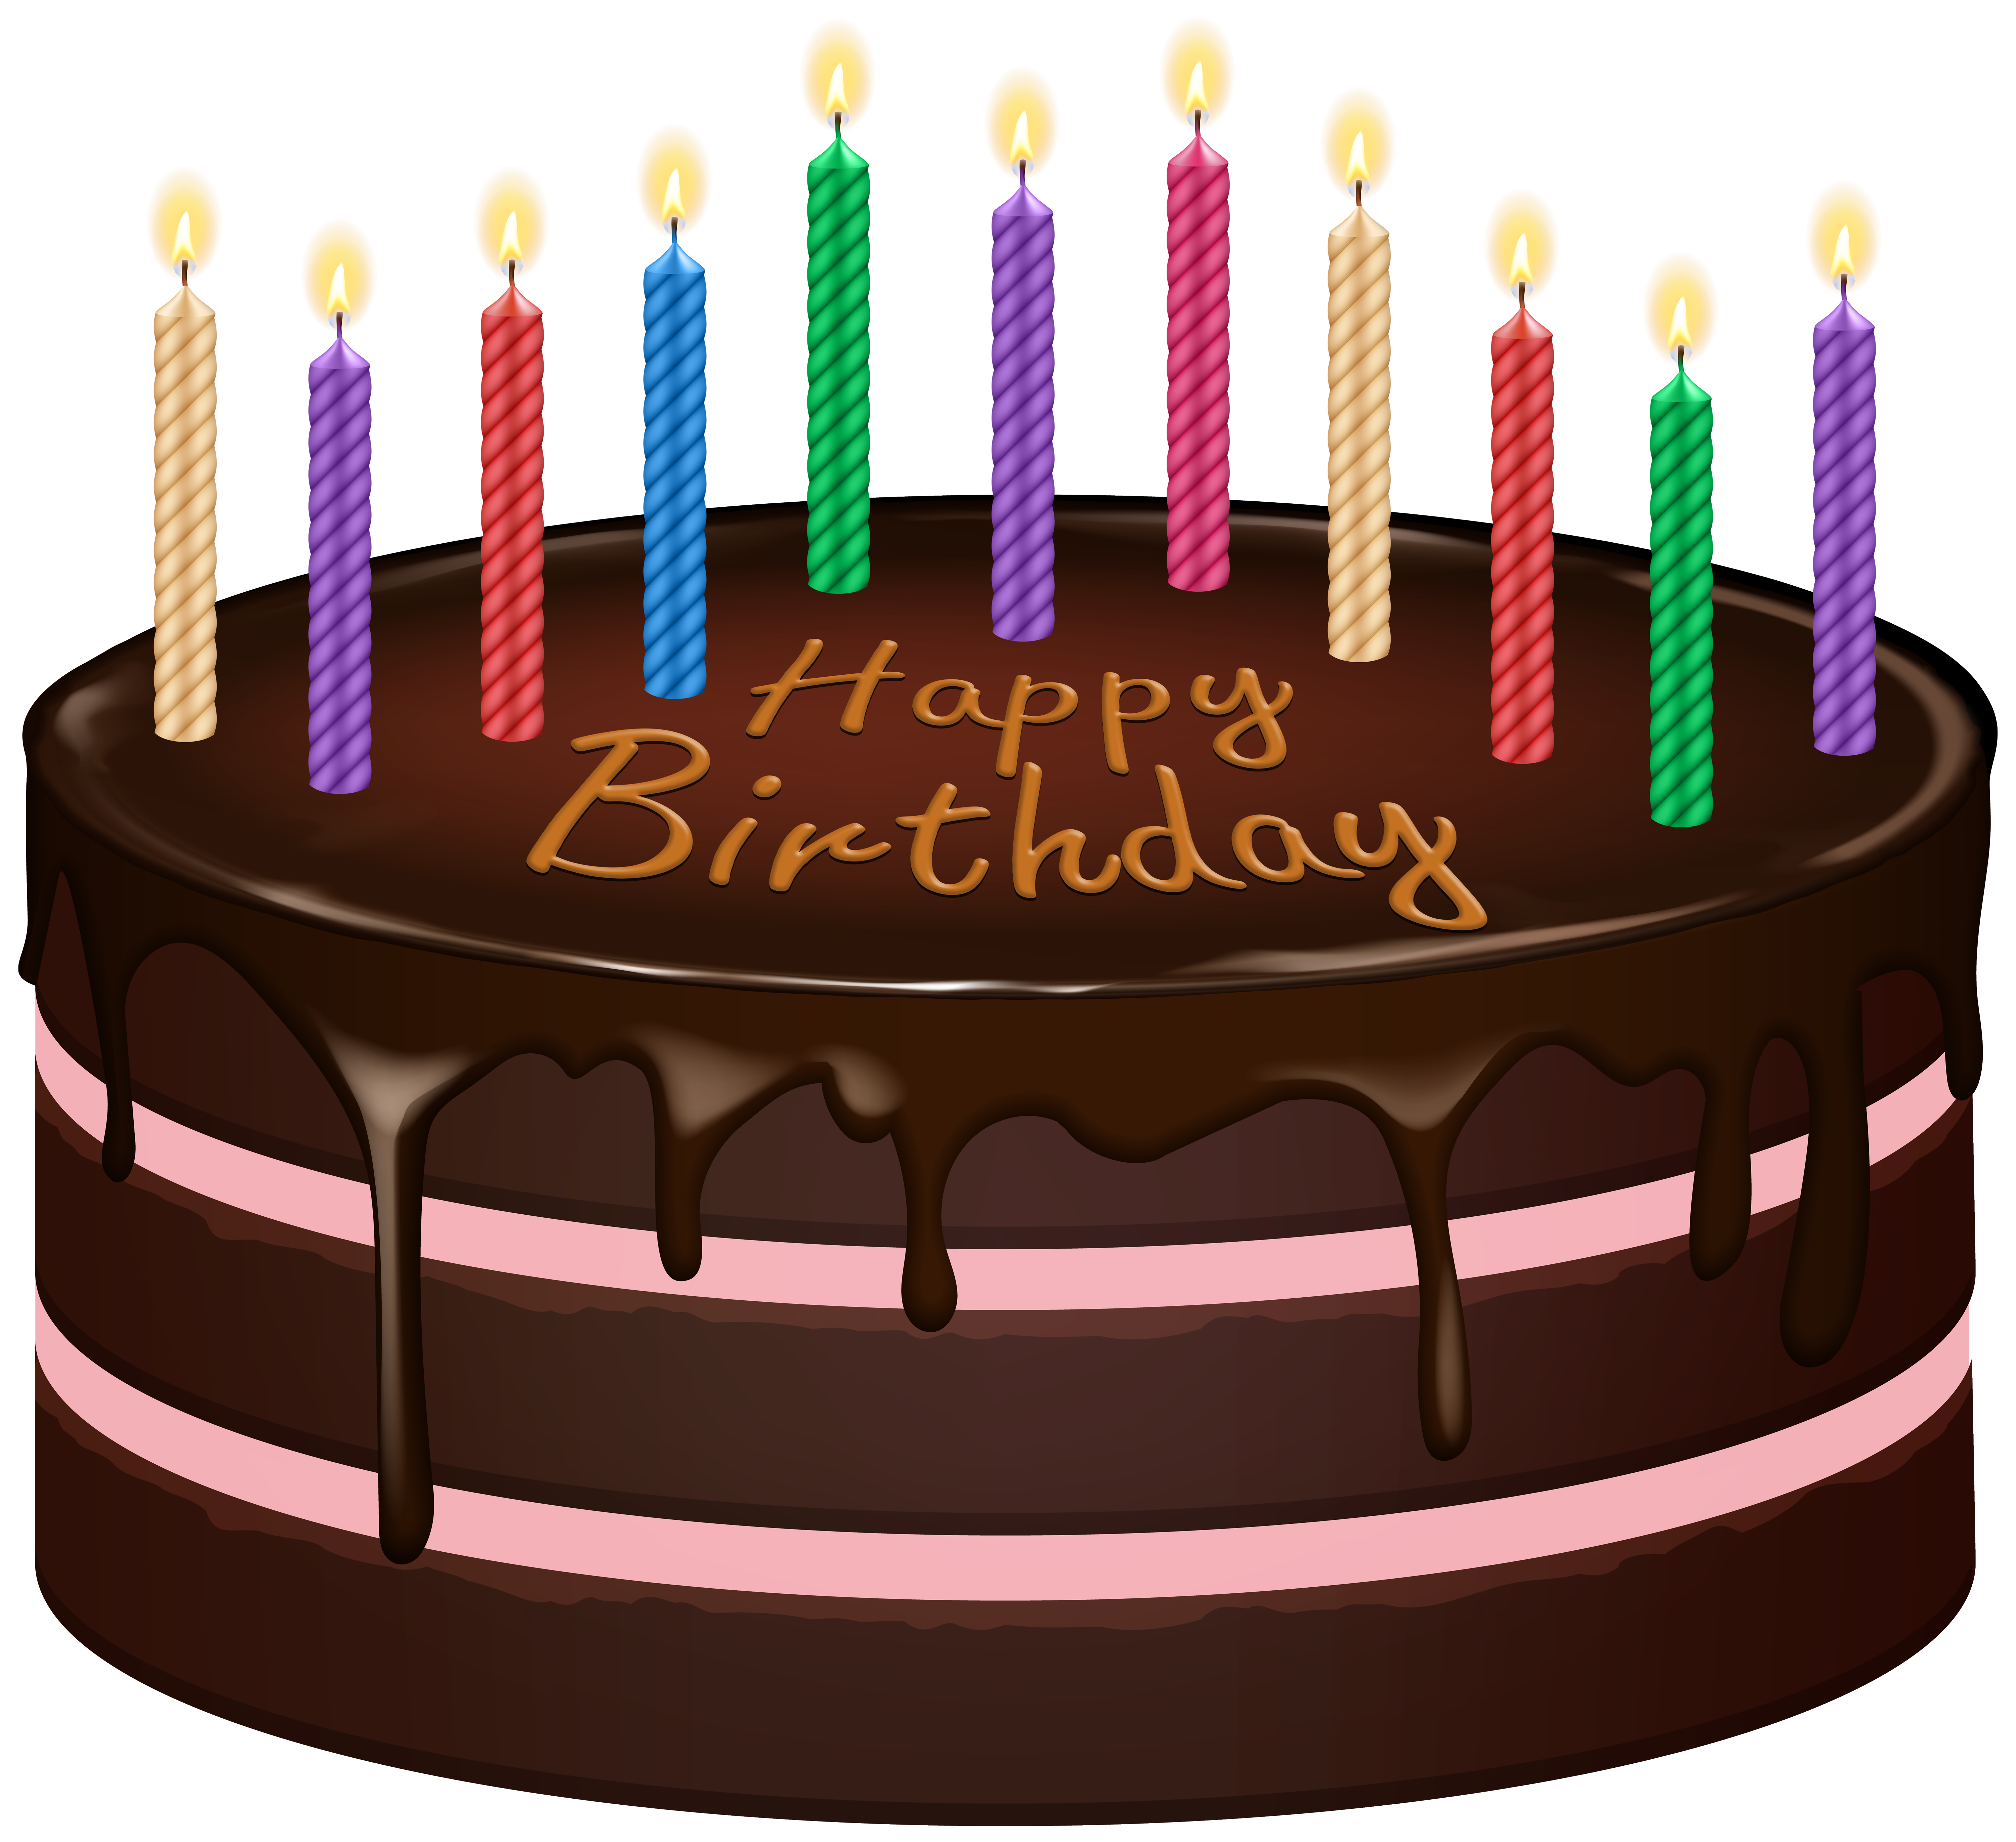 Birthday Cake PNG Image  PNG Mart